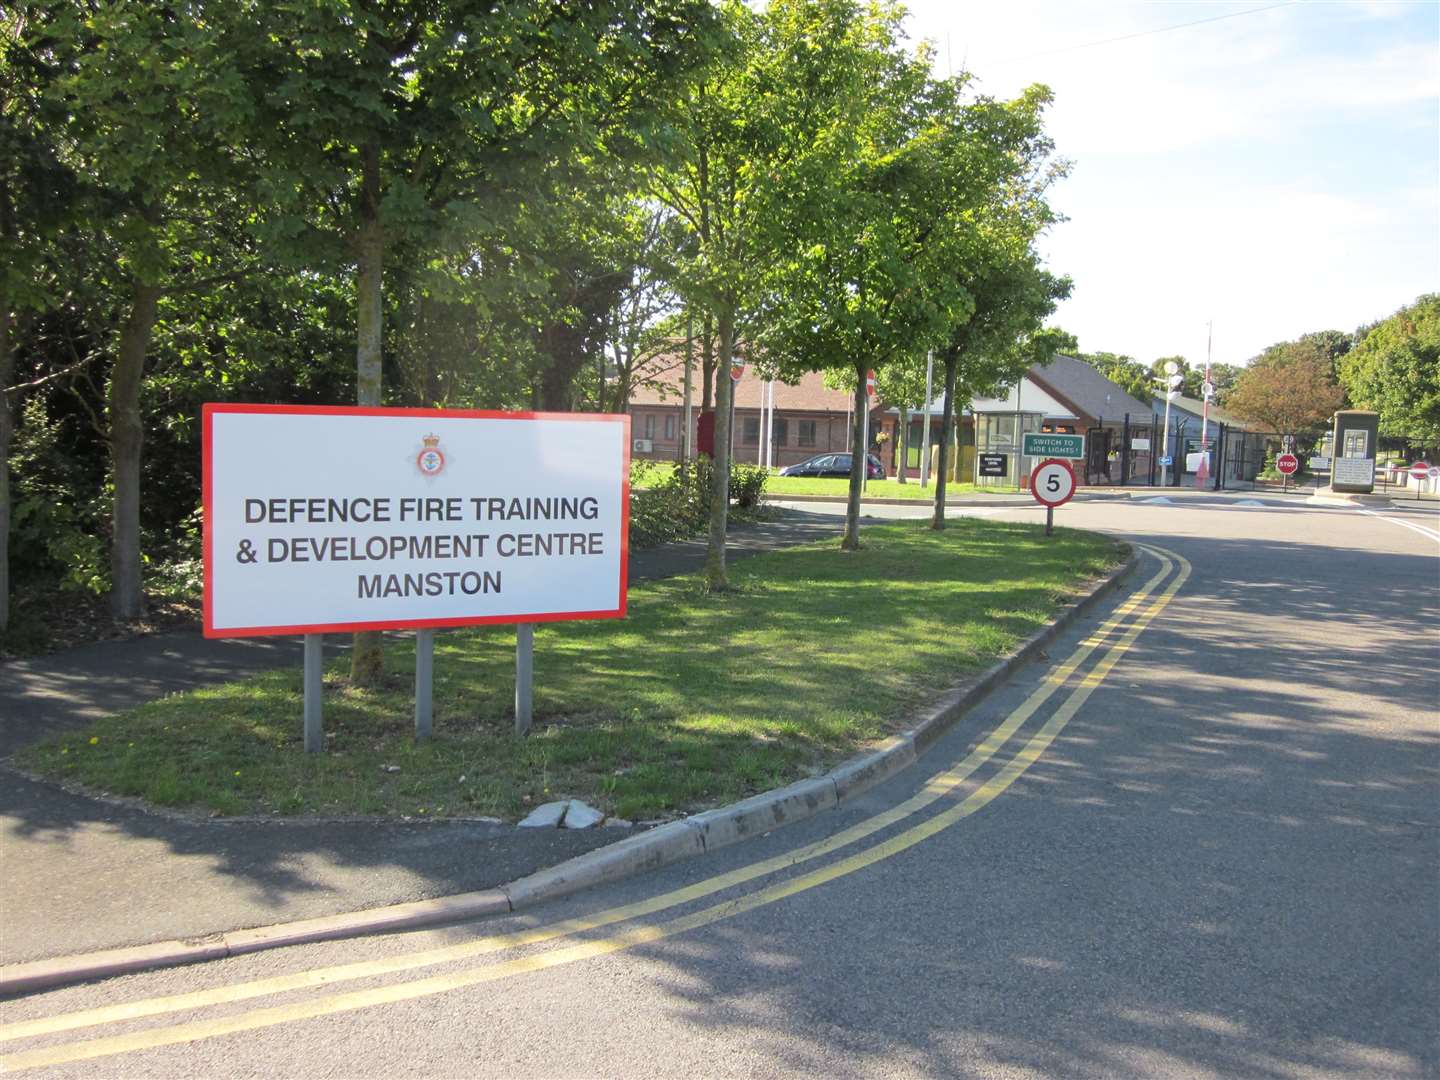 The former Defence Fire Training and Development Centre at Manston, in Thanet